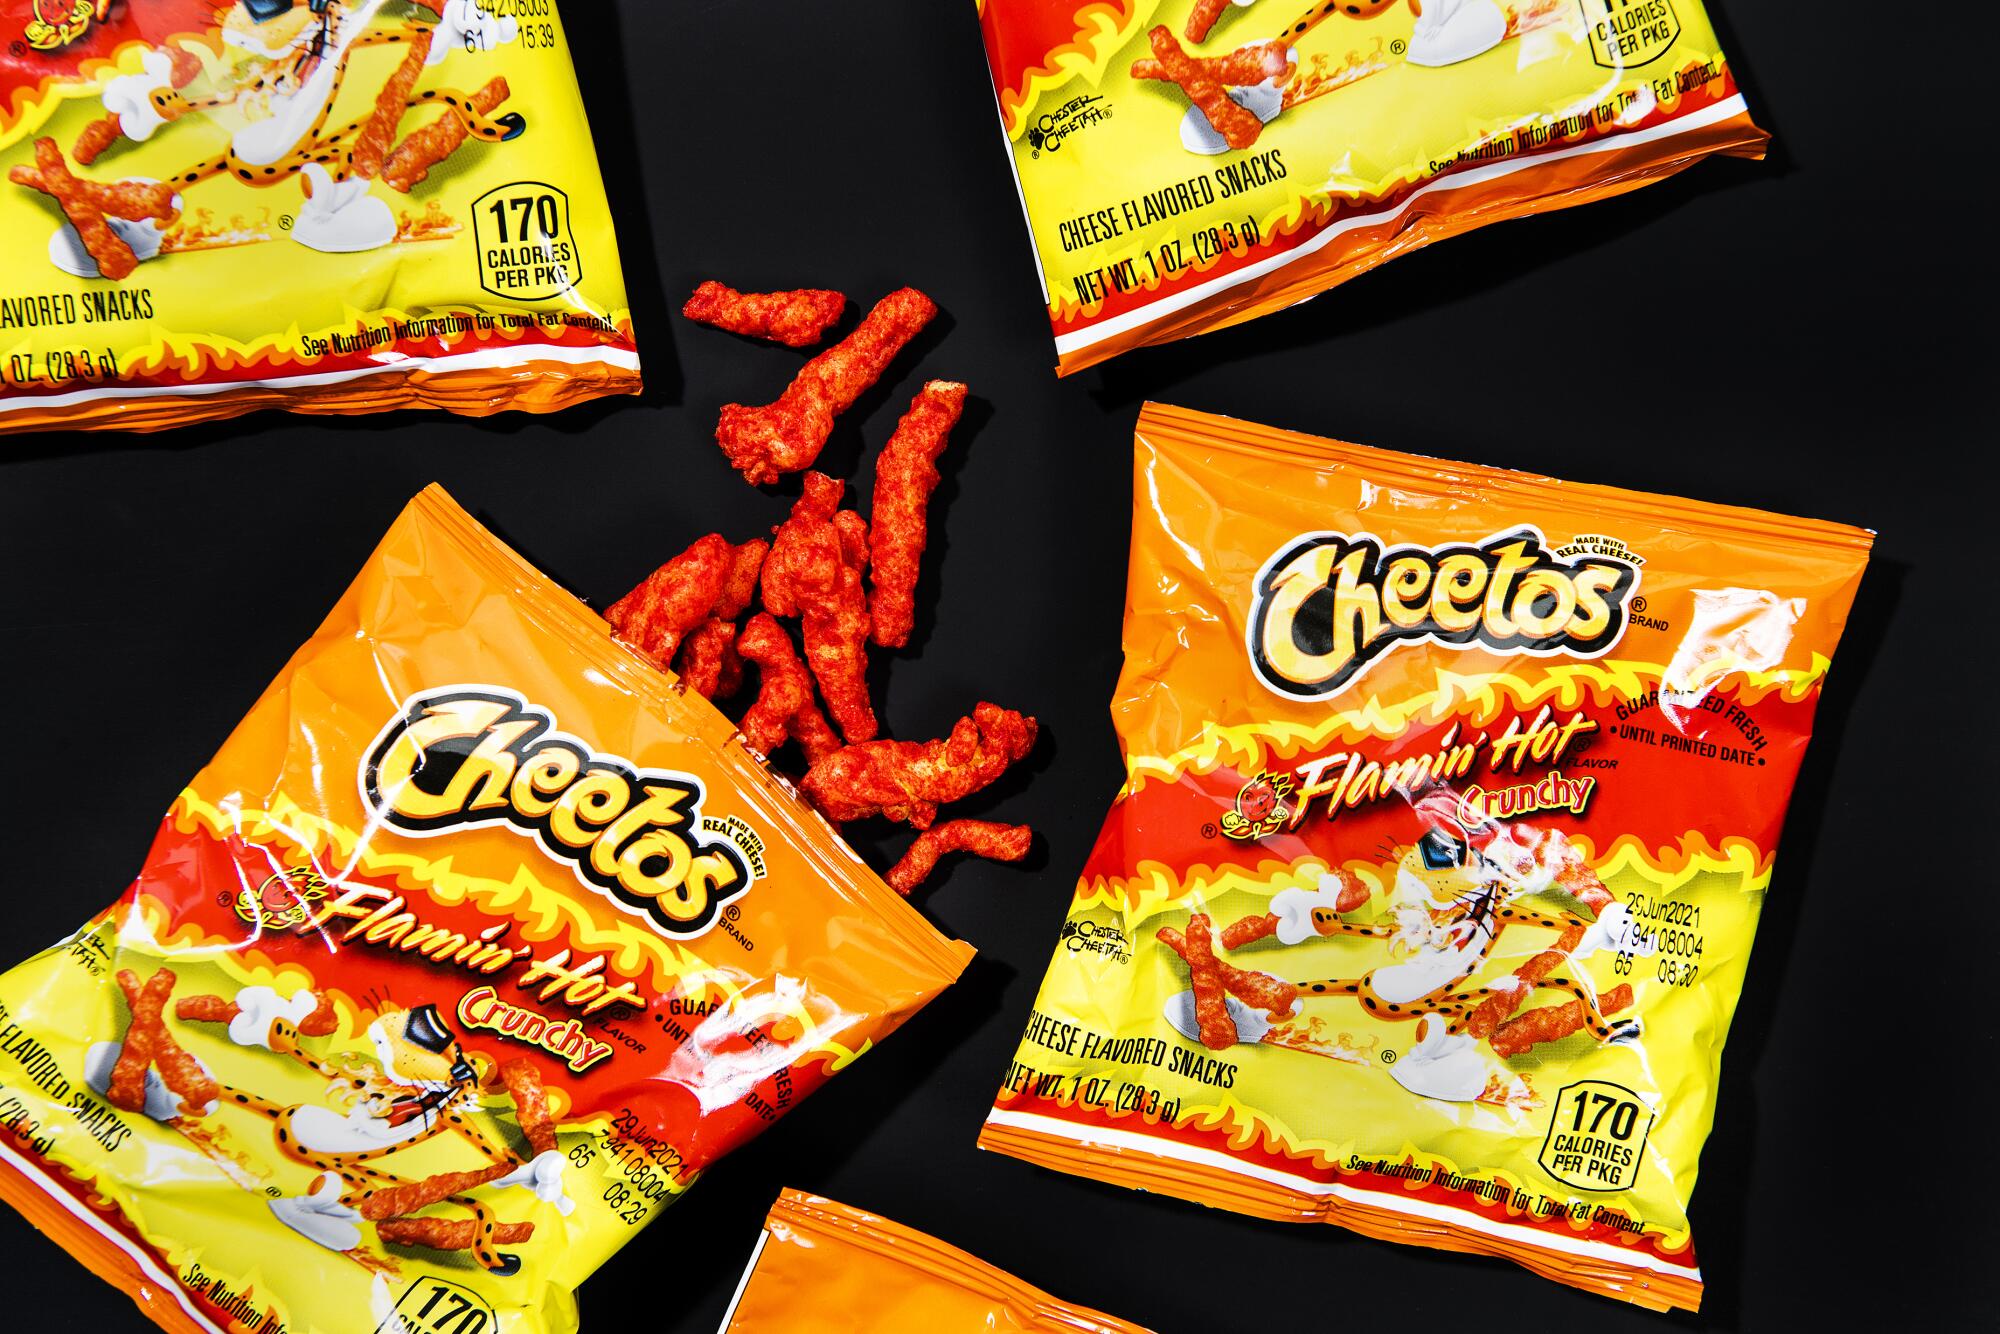  Cheetos Xxtra Flamin Hot, Pack of 32